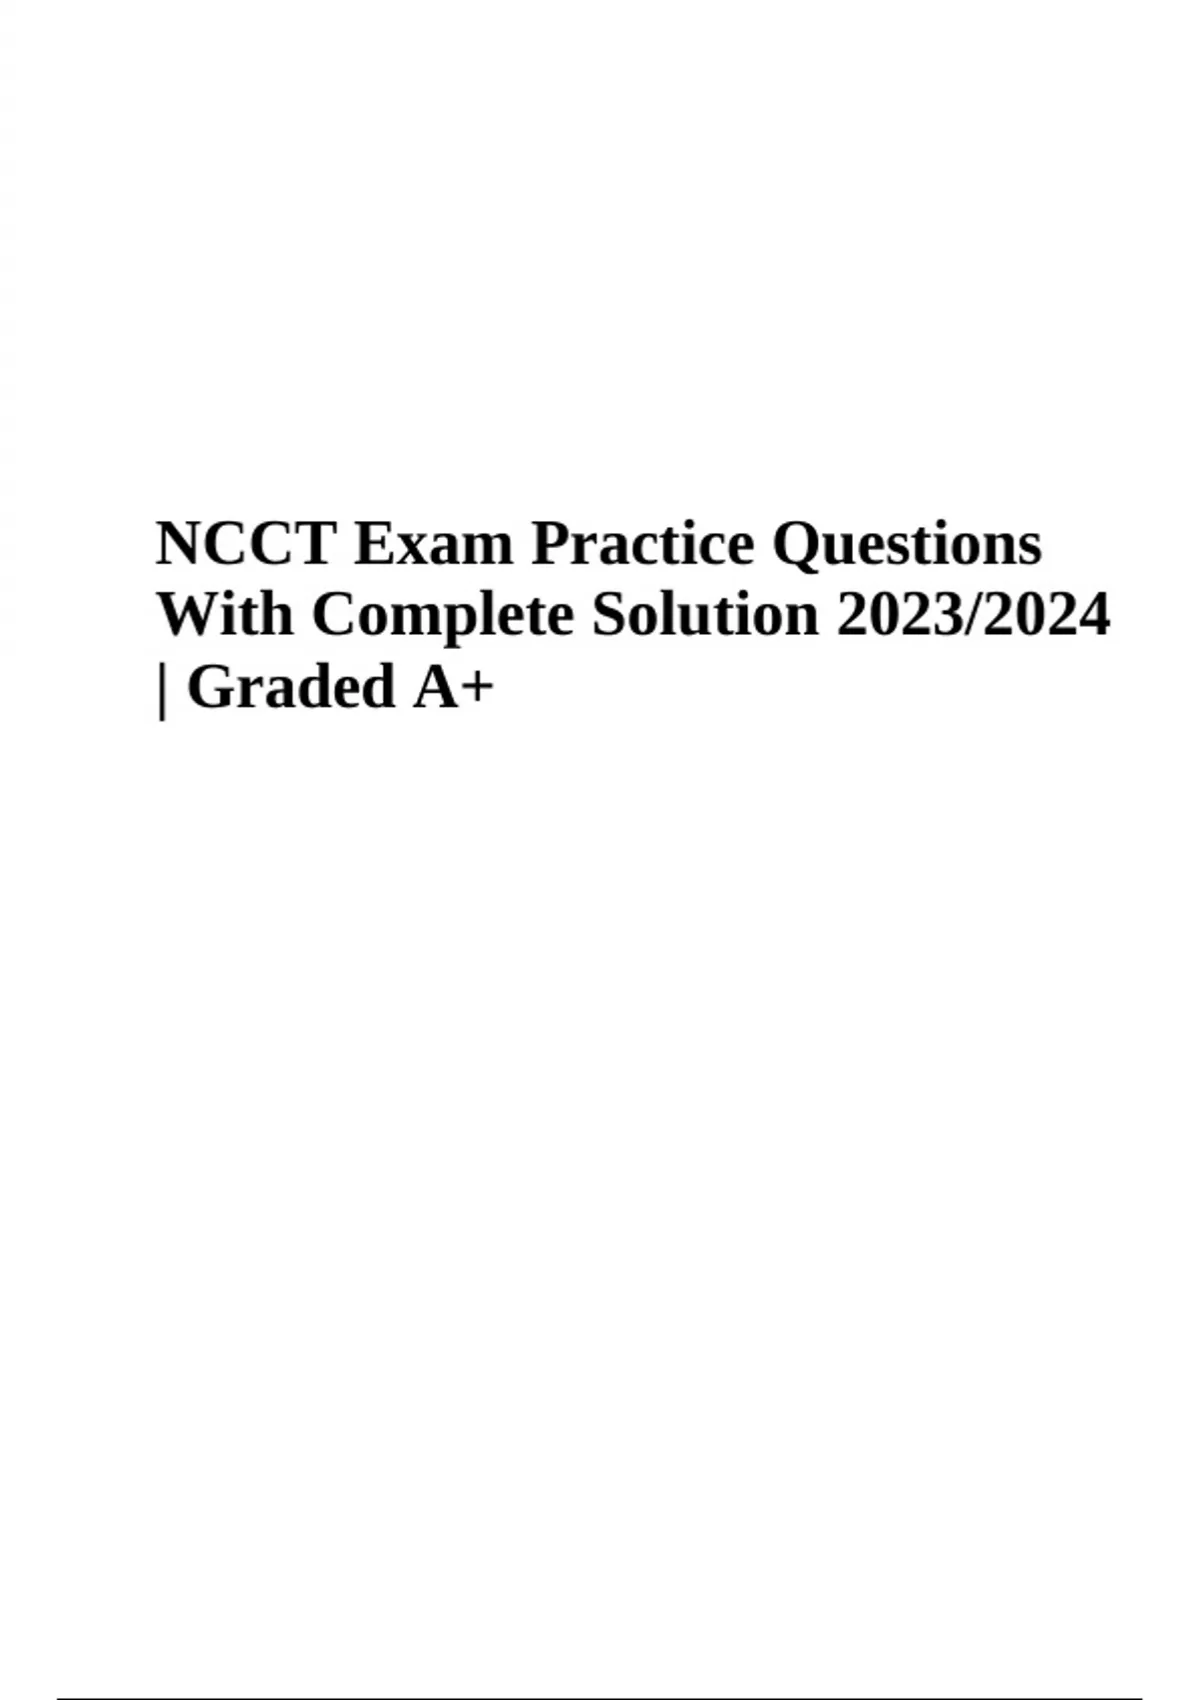 NCCT Exam Practice Questions With Complete Solution 2023/2024 Graded